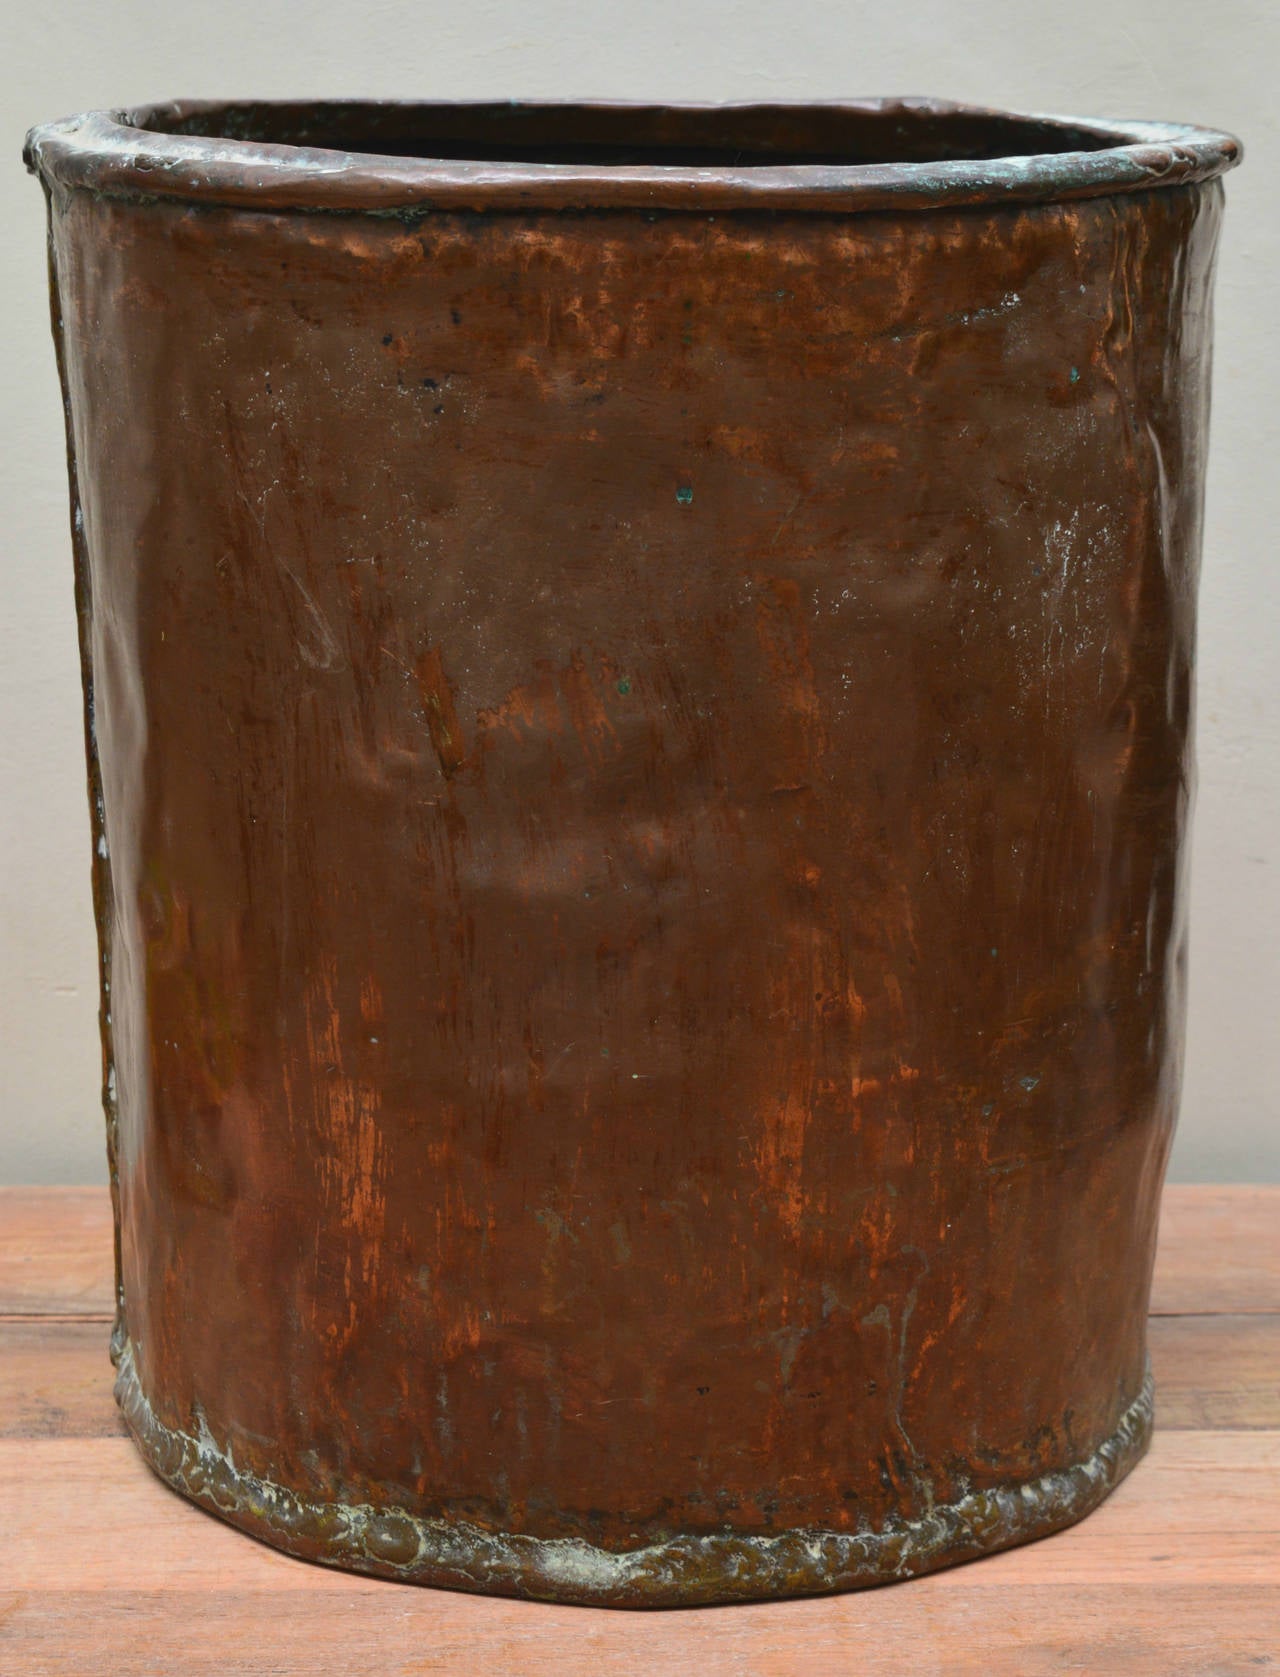 This is a solid copper bin circa 1880. The naturally acquired patina could not be more beautiful.
The size of this bin makes it possible to use for logs, as a planter, or as a waste paper bin.